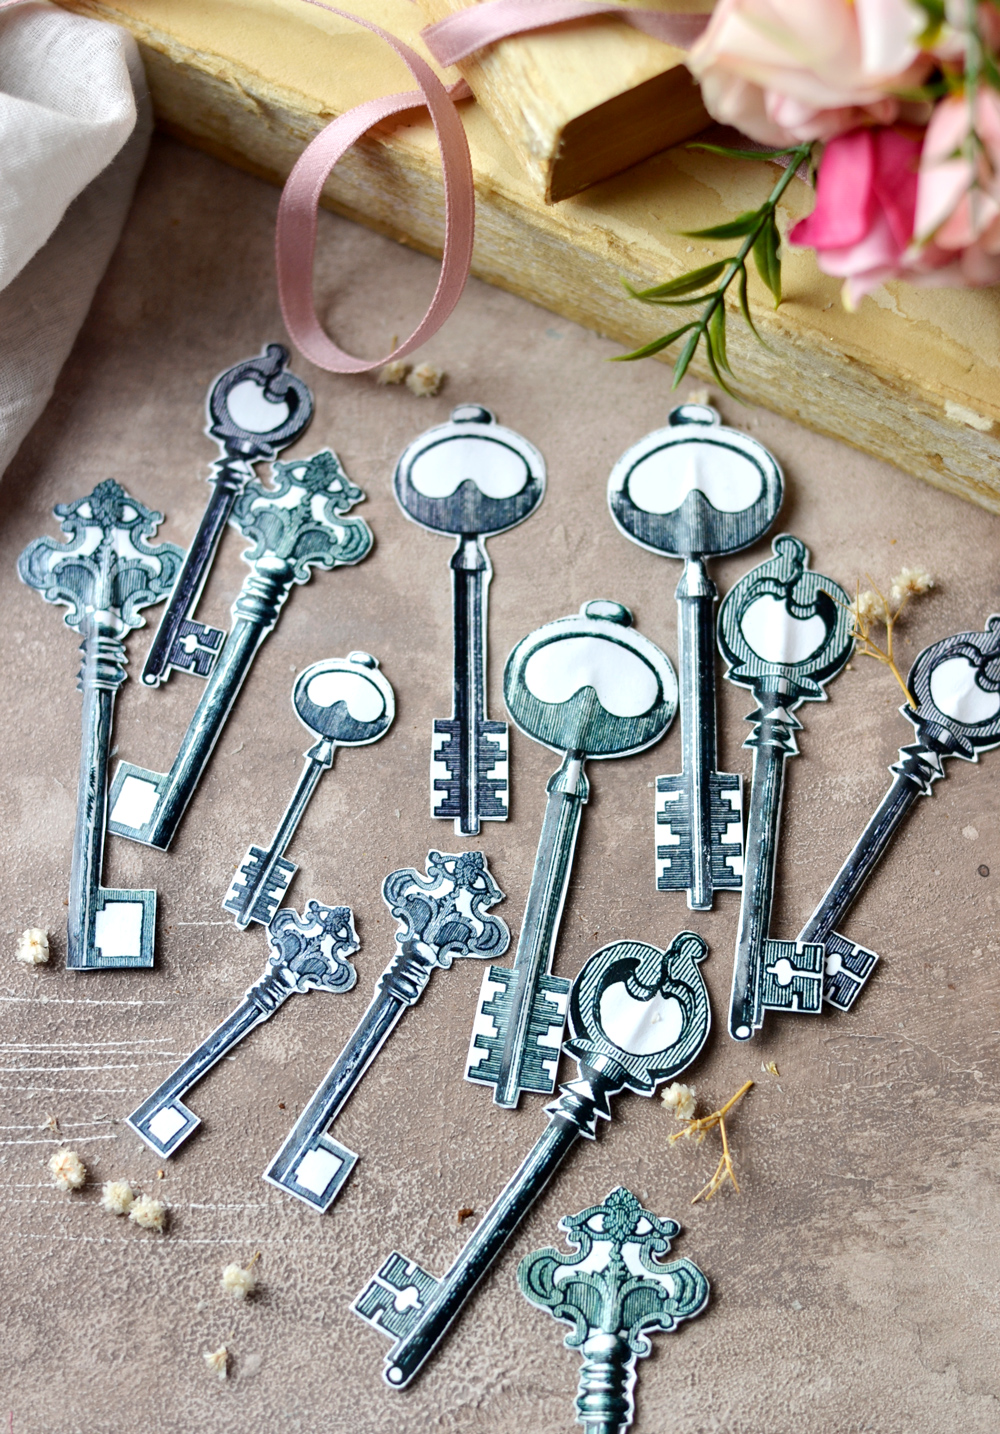 Learn how to make beautiful DIY Vintage Paper Key Tags to decorate your farmhouse, Shabby Chic or Vintage home with style ... and open new doors and opportunities for the new decade!